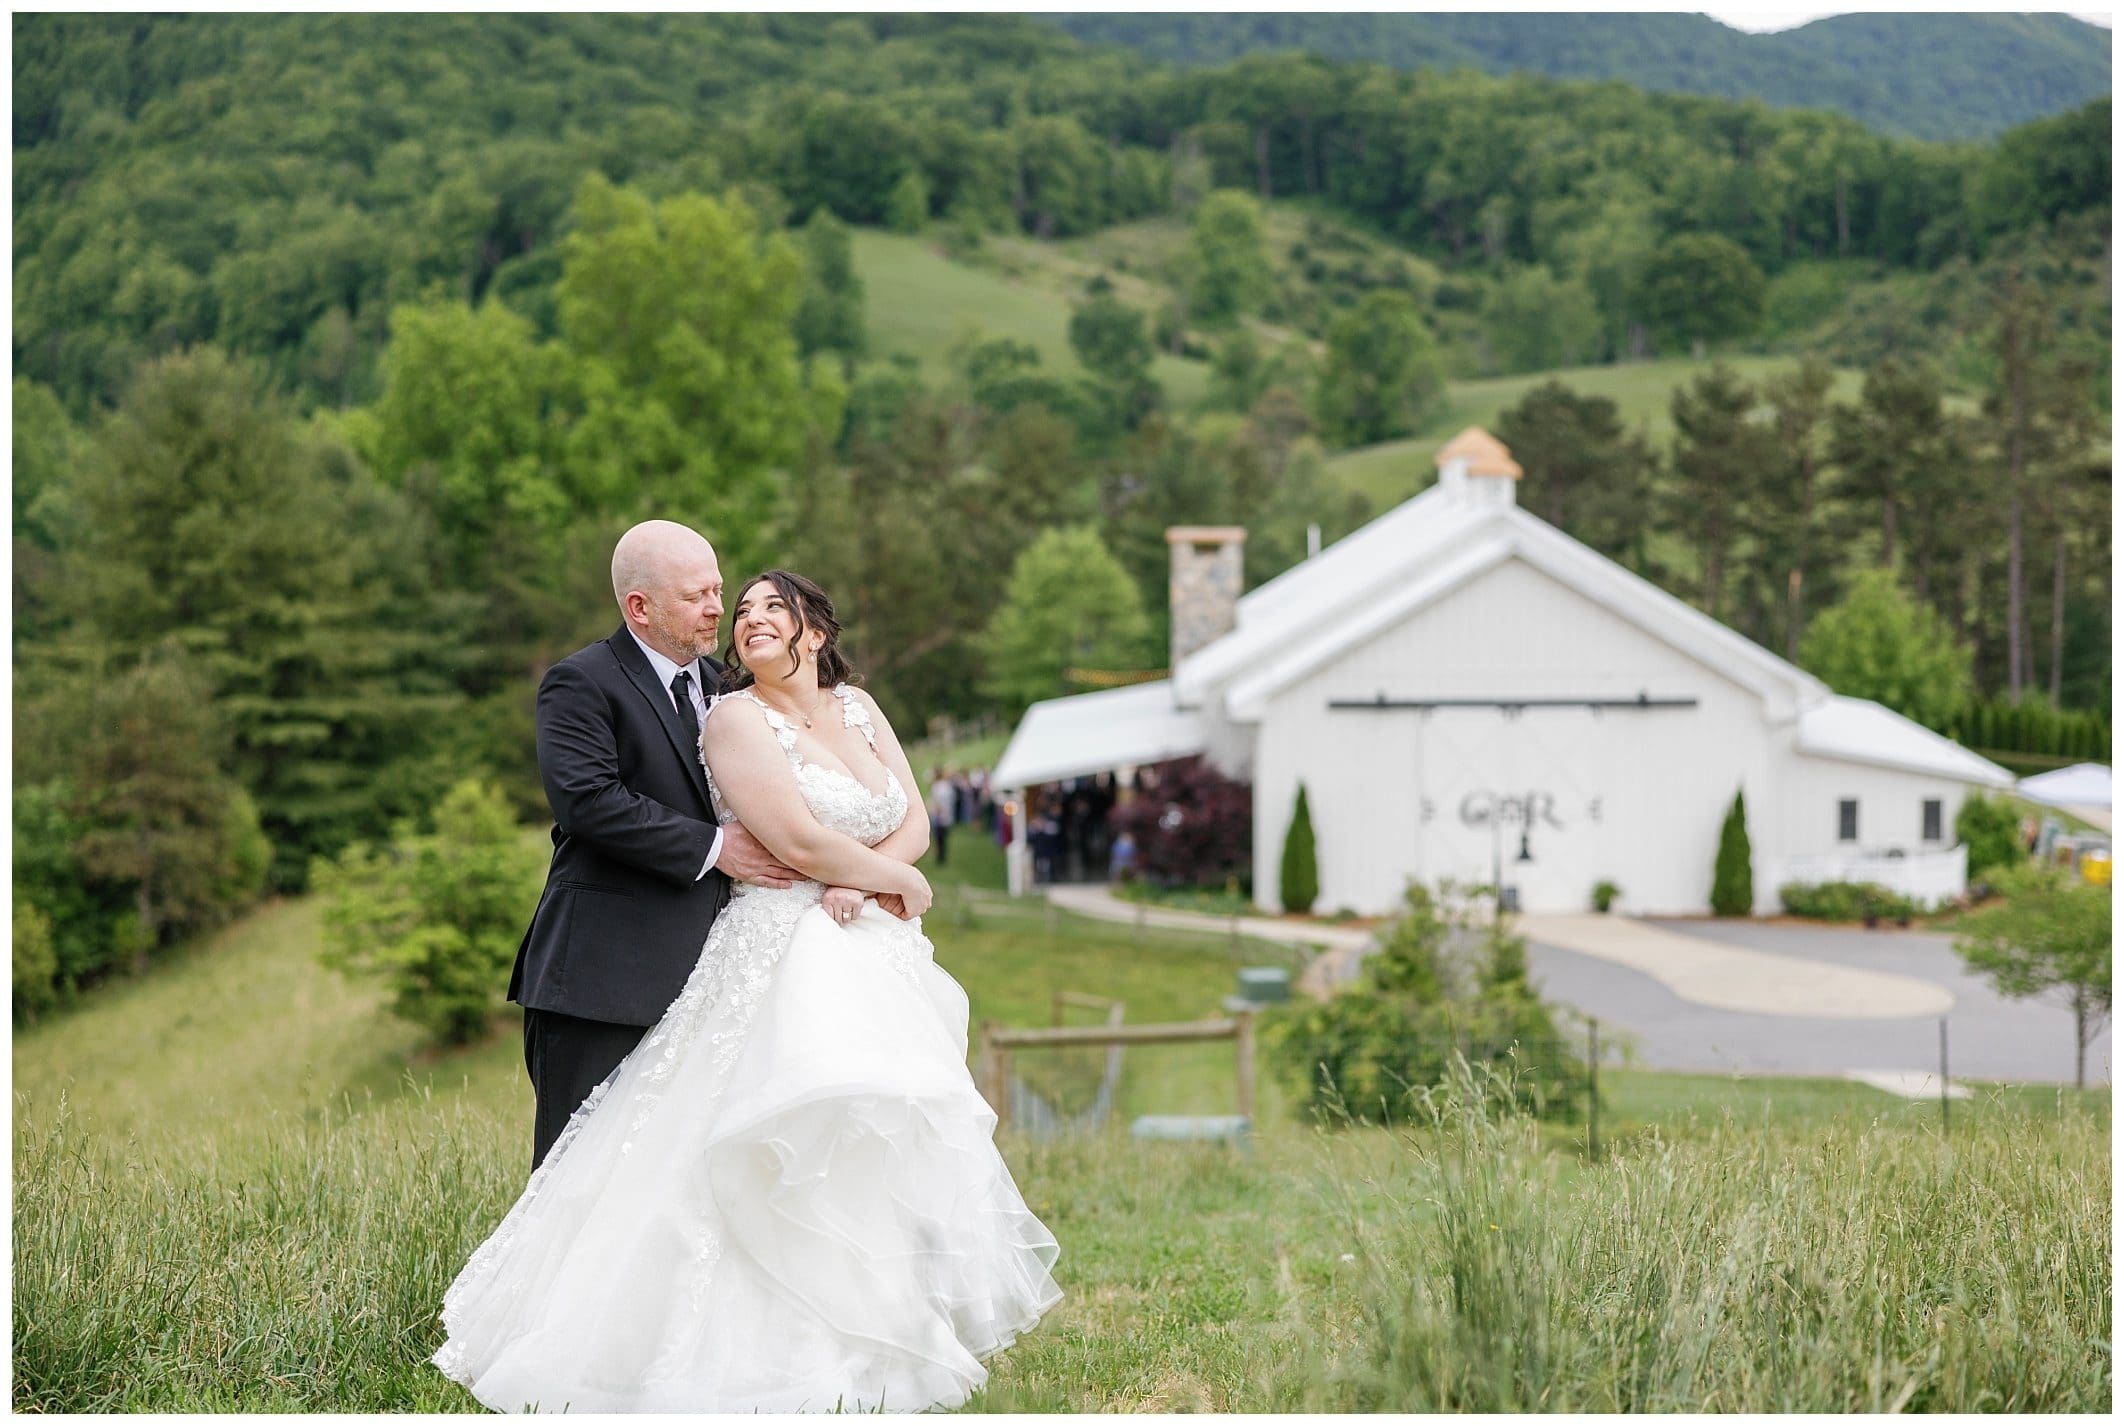 Bride and groom laughing in field with wedding venue behind them. 